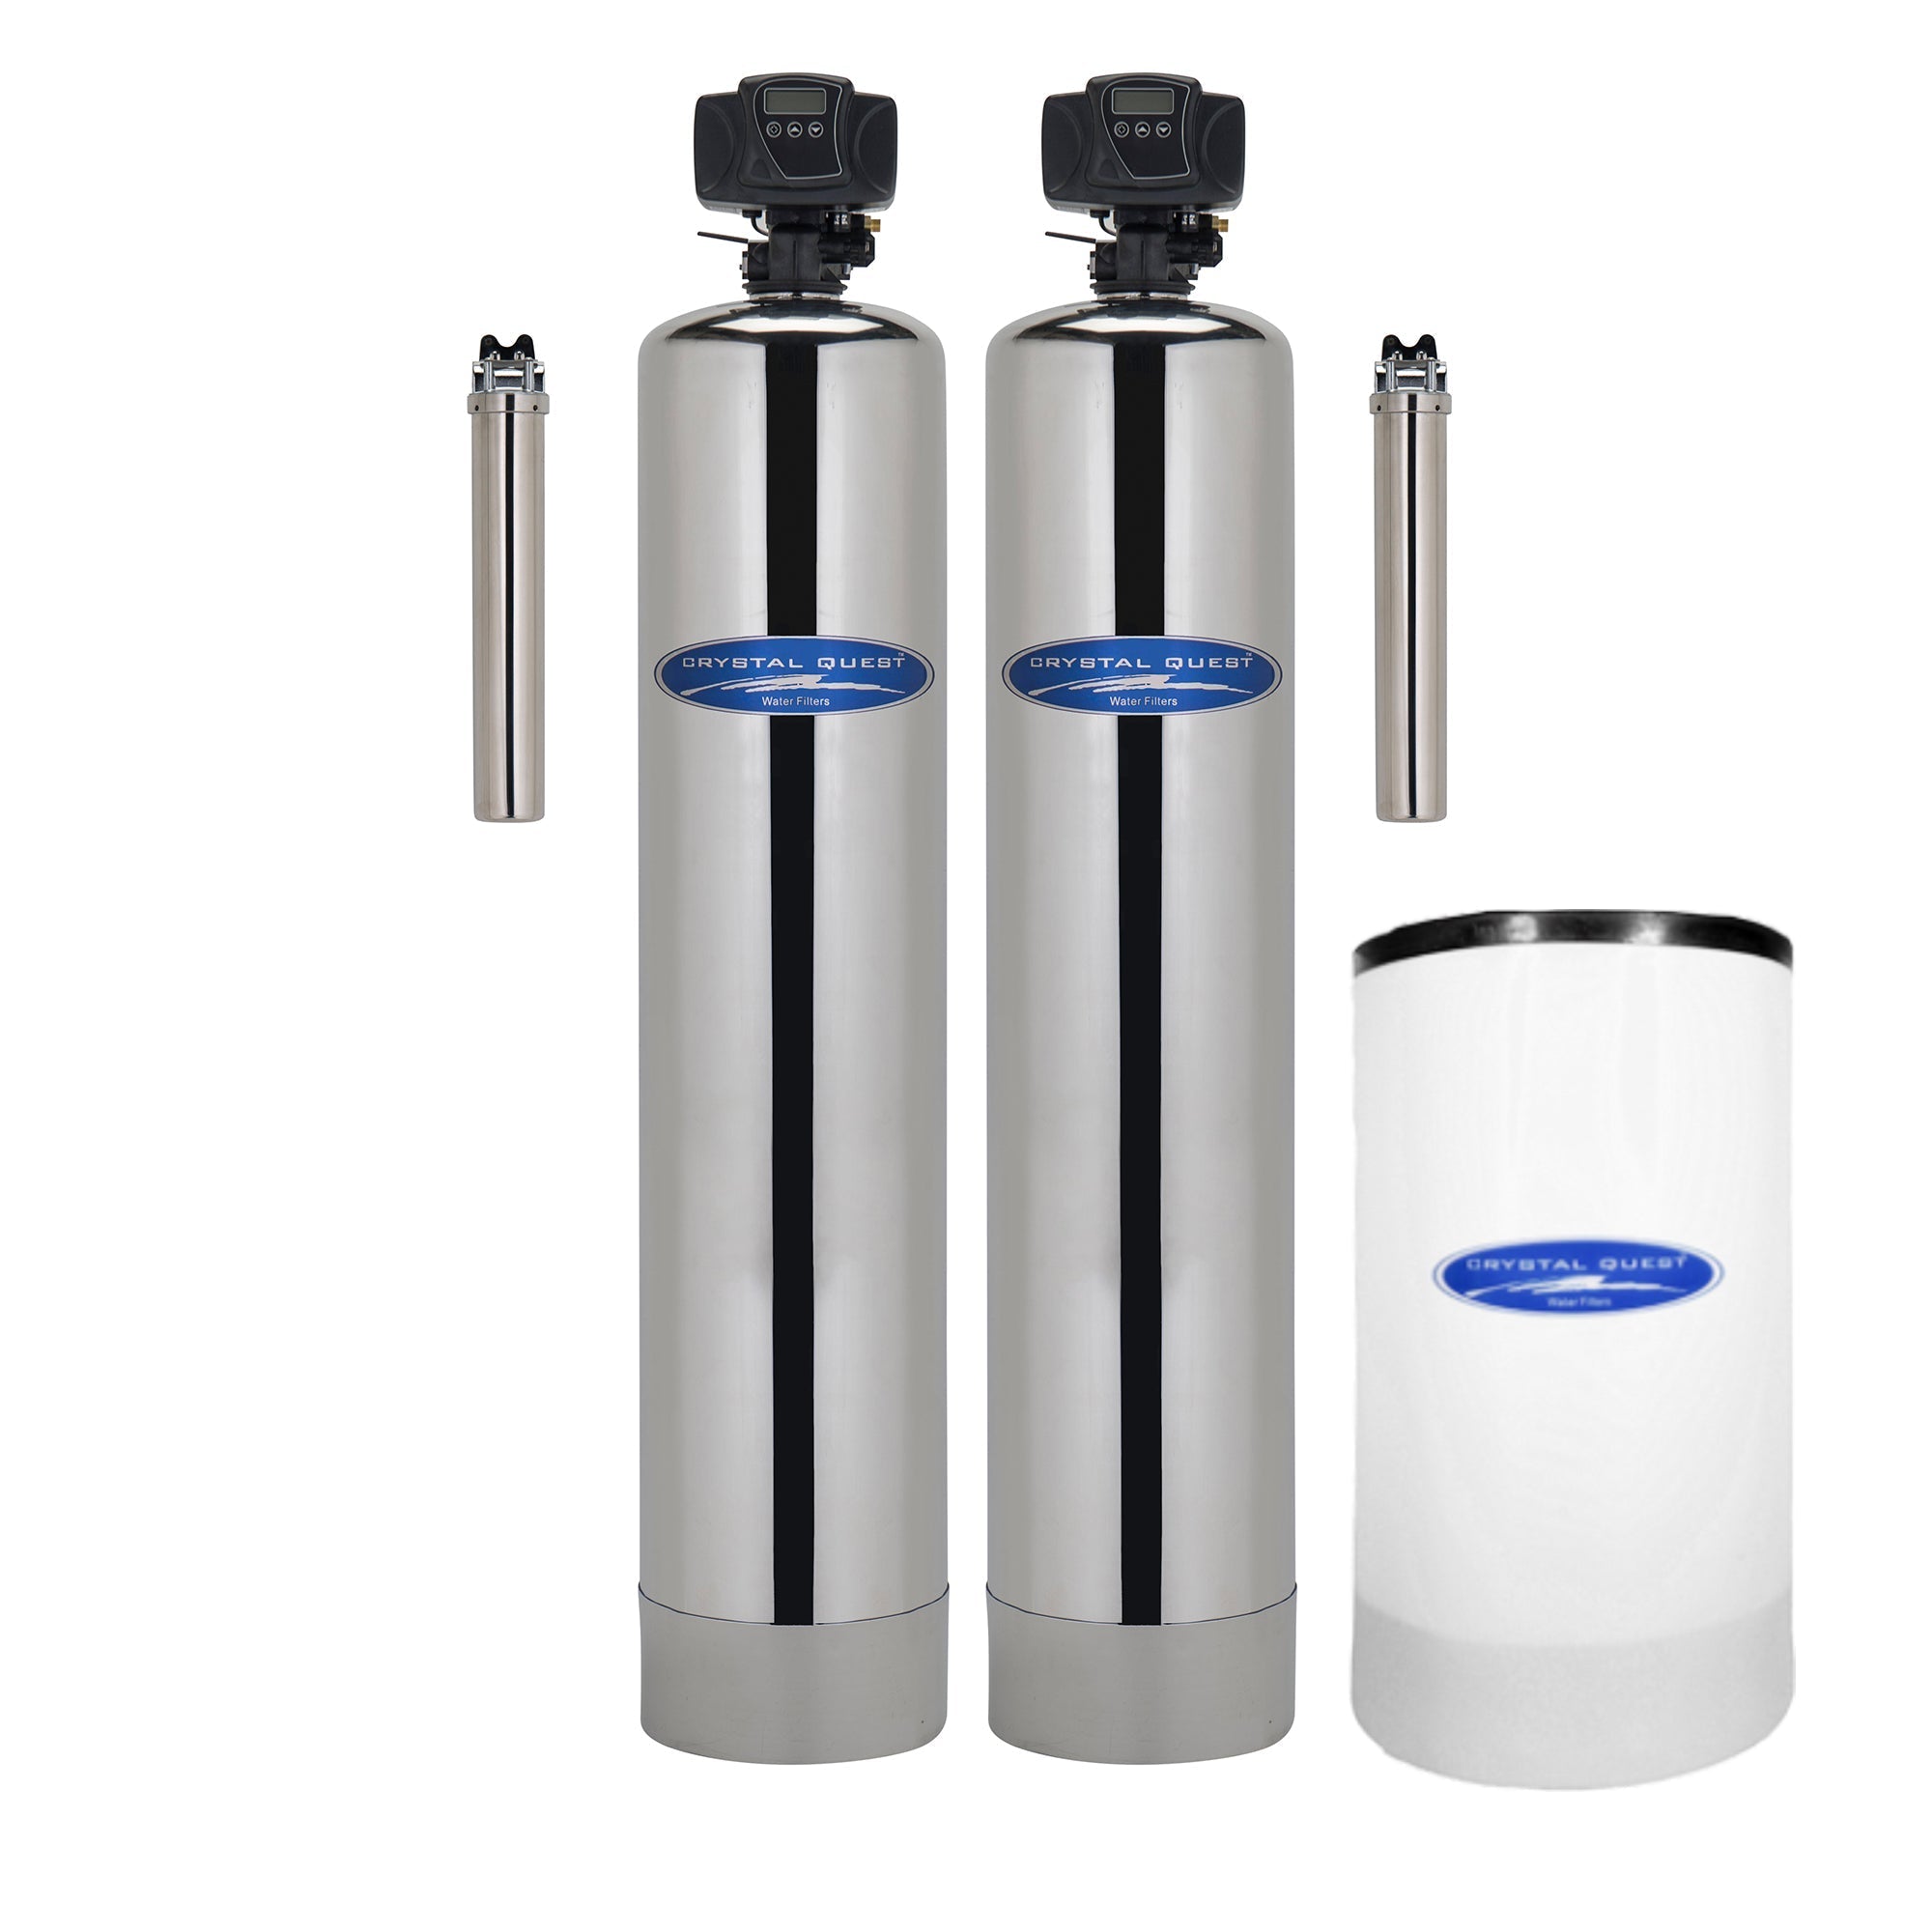 Add Softener / Stainless Steel / 1,000,000 Gallons SMART Whole House Water Filter (9-13 GPM) - Whole House Water Filters - Crystal Quest